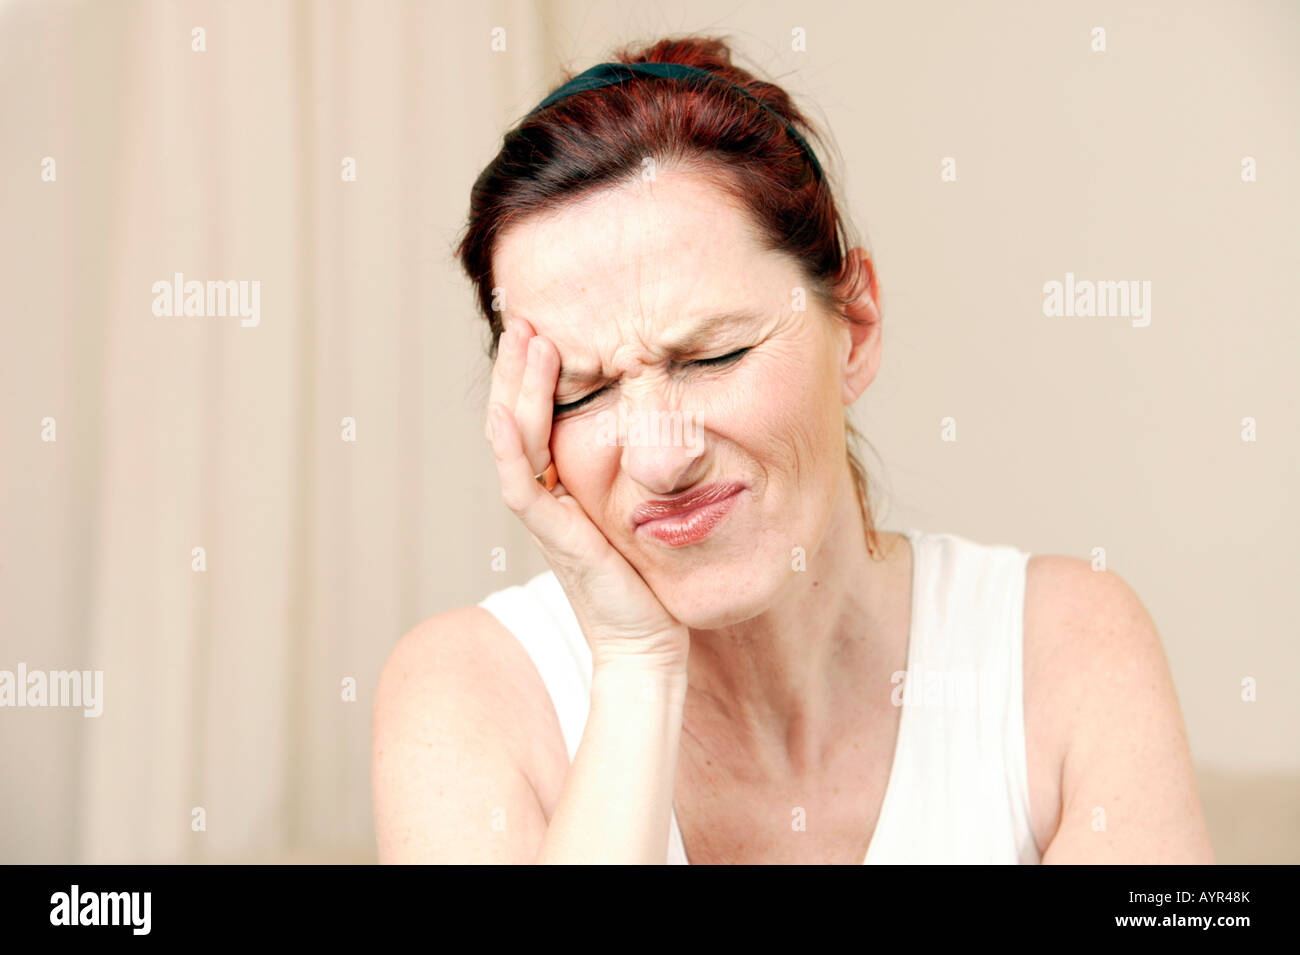 Middle-aged woman holding hand to her forehead Stock Photo